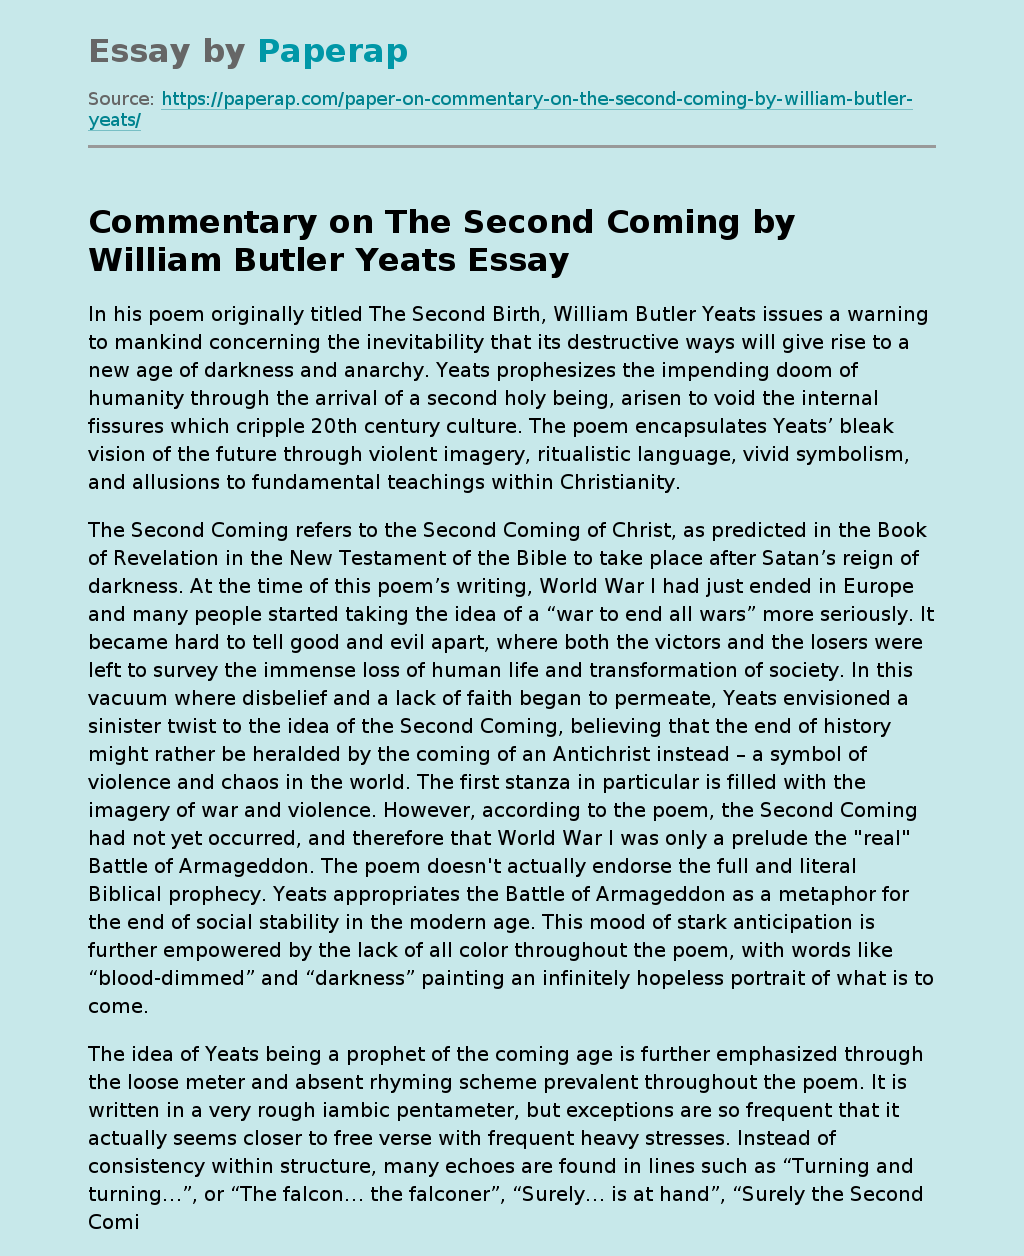 Commentary on The Second Coming by William Butler Yeats